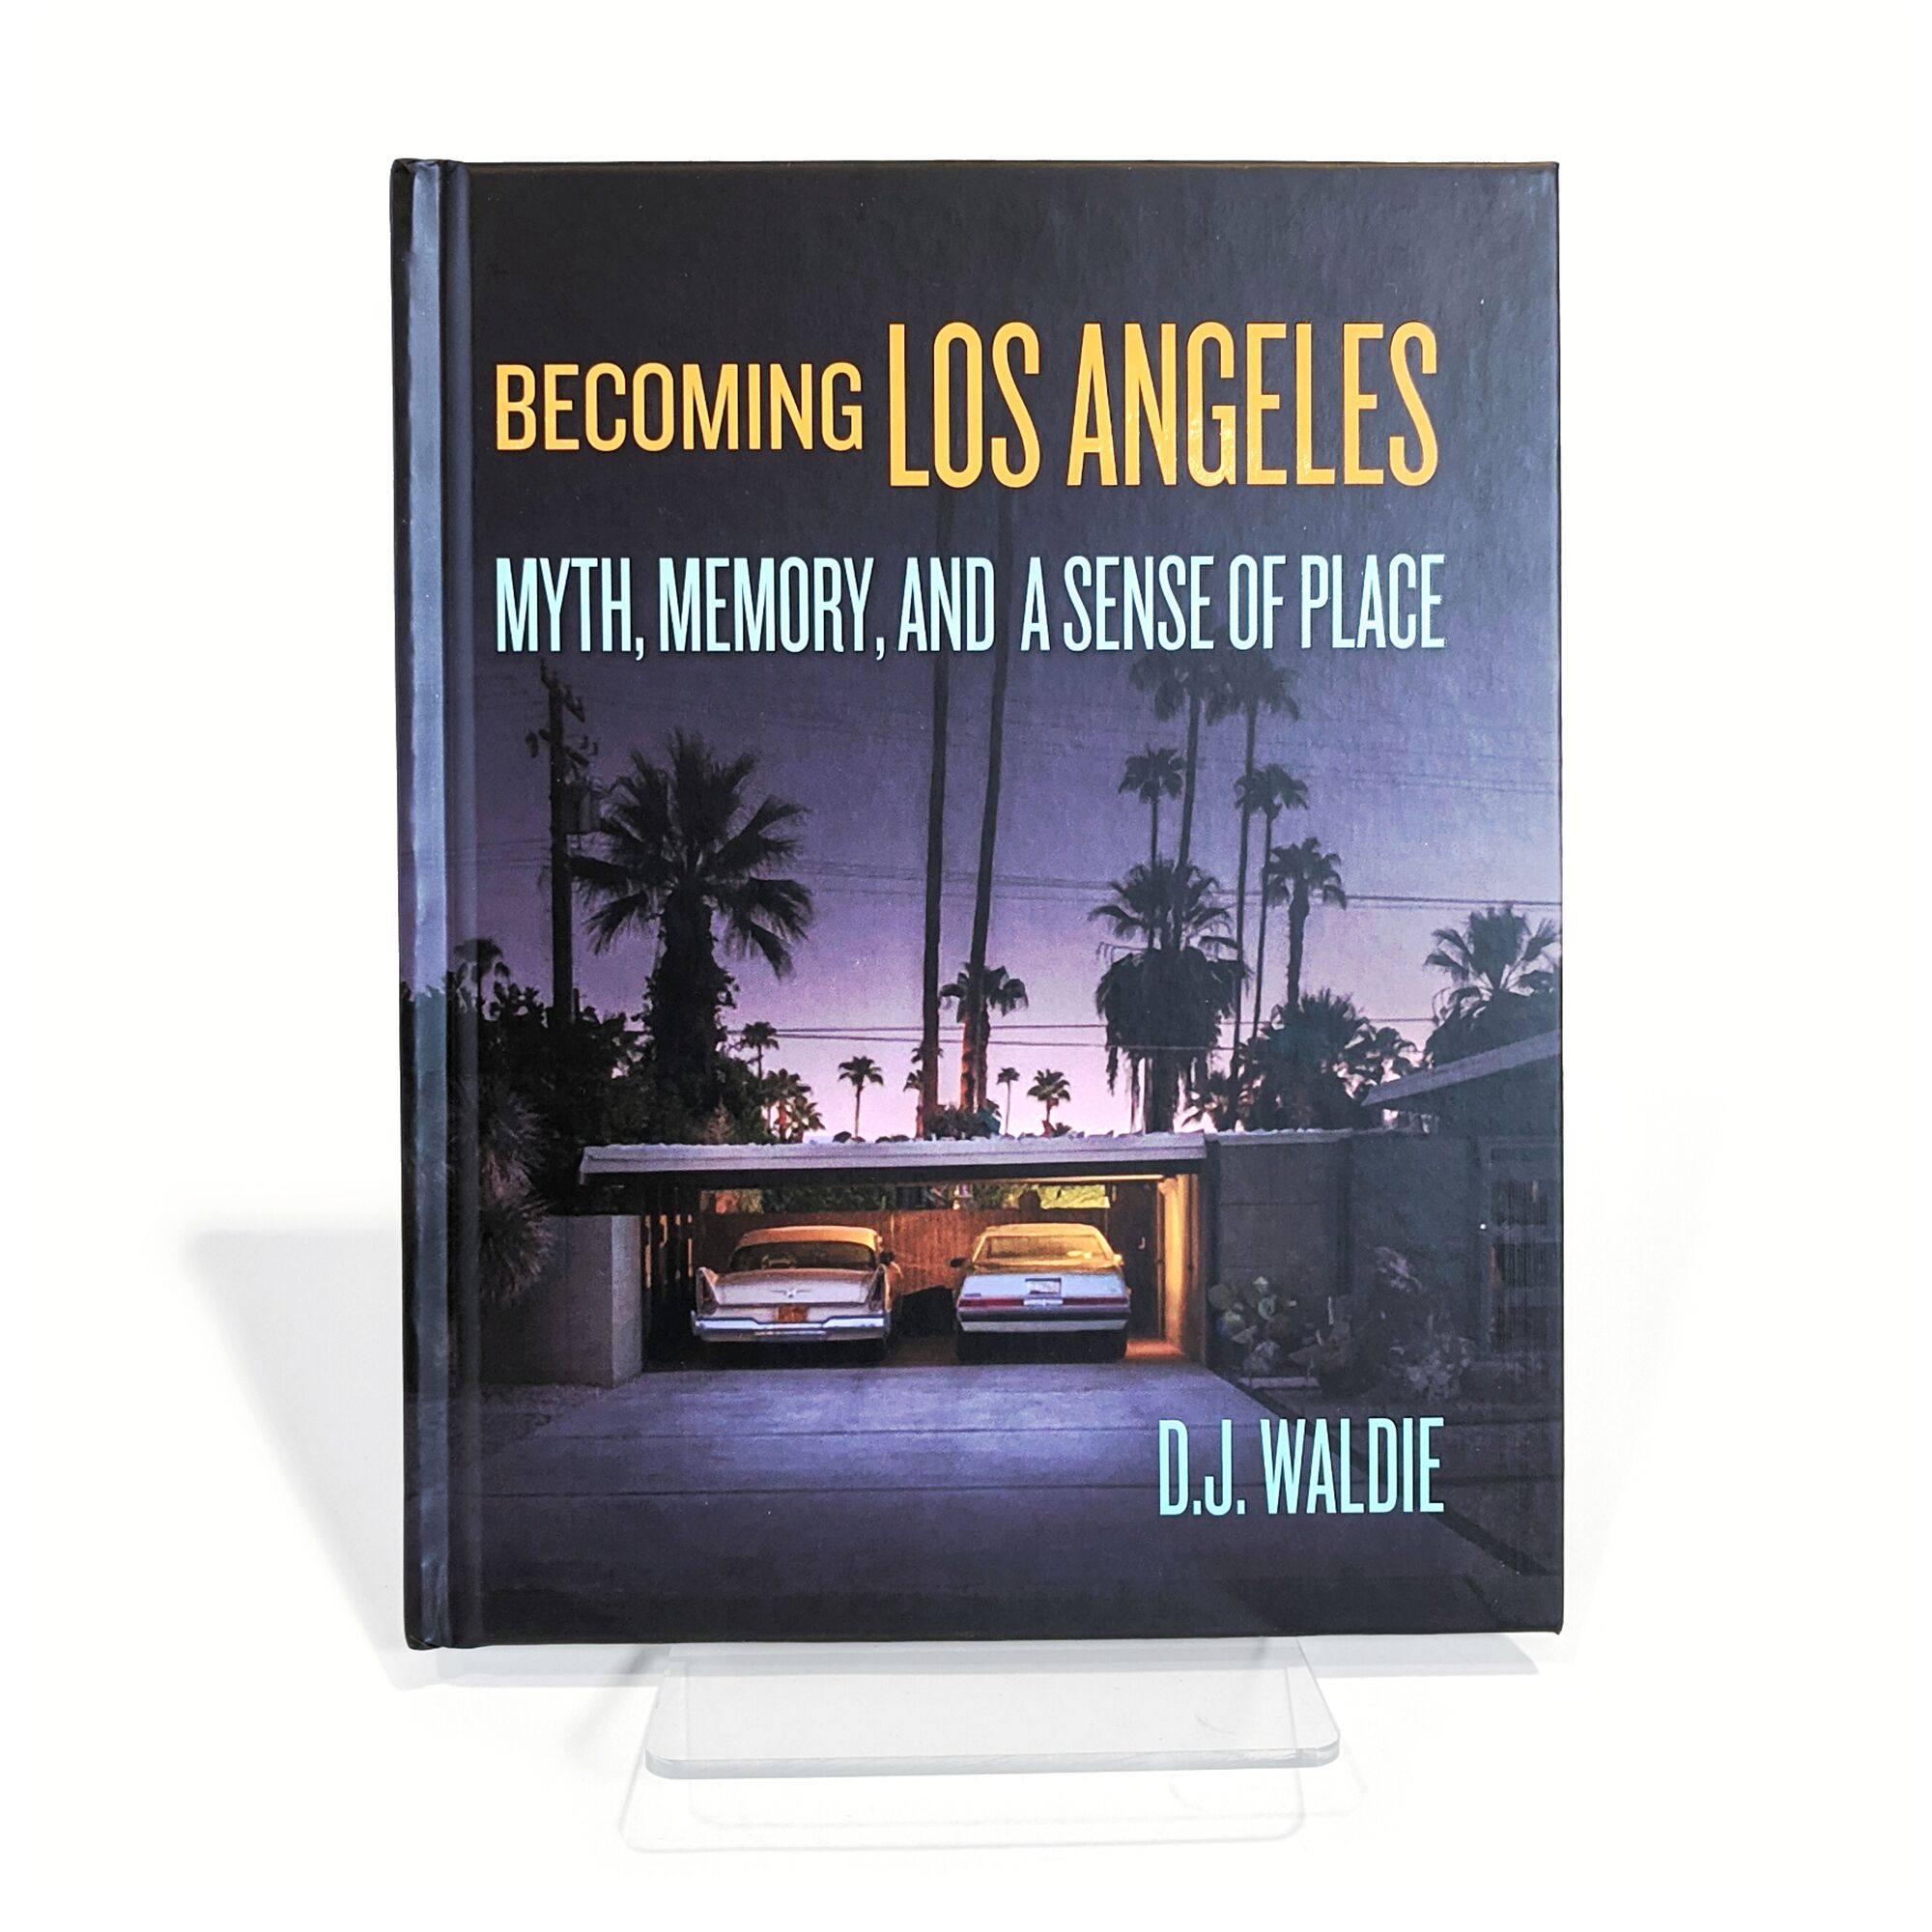 D.J. Waldie’s essay collection, “Becoming Los Angeles,” which explores Los Angeles through the raconteur’s own unique lens.